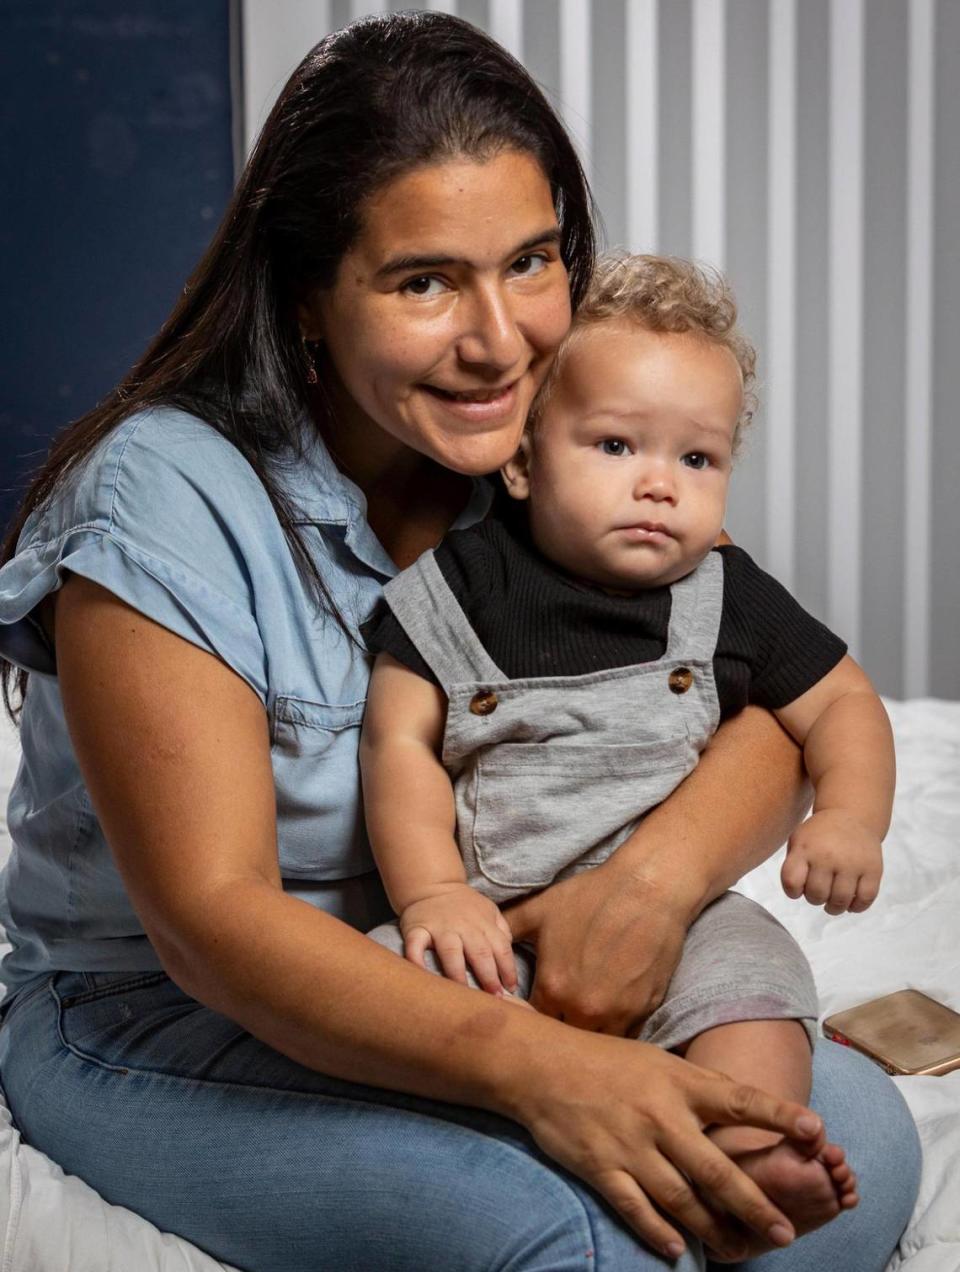 Kimberly Lanz, 35, takes her baby, Jake Azocar, to work with her so she can avoid paying $1,000 a month for daycare. Jose A. Iglesias/jiglesias@elnuevoherald.com